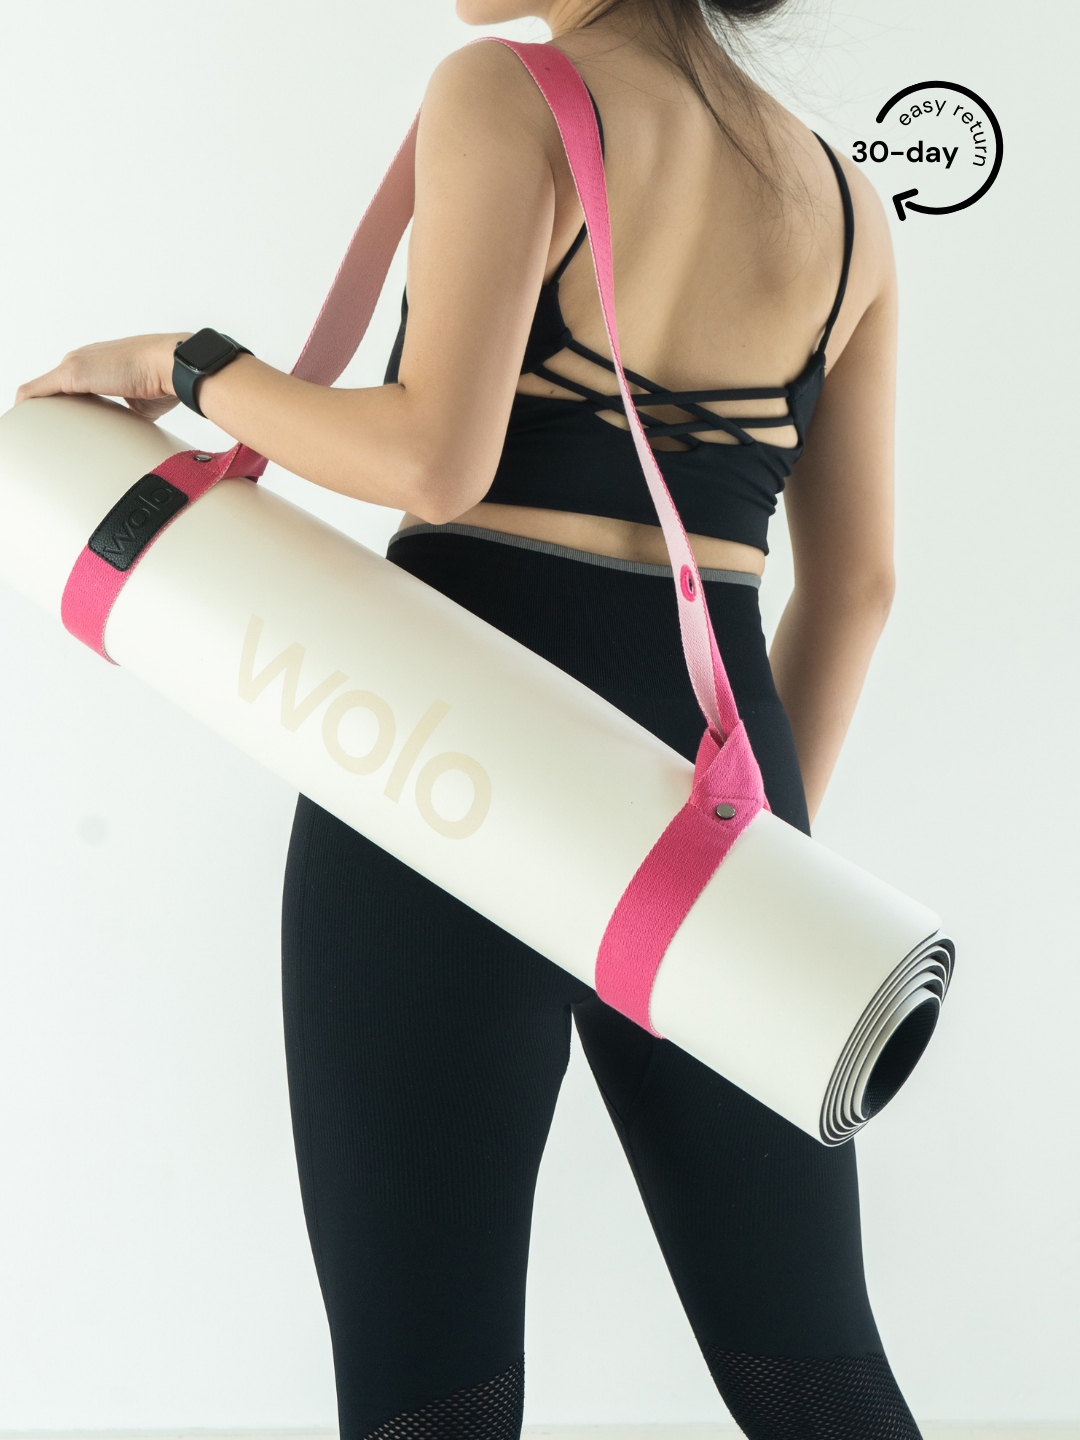 Lady carry a white yoga mat with a pink mat carry strap